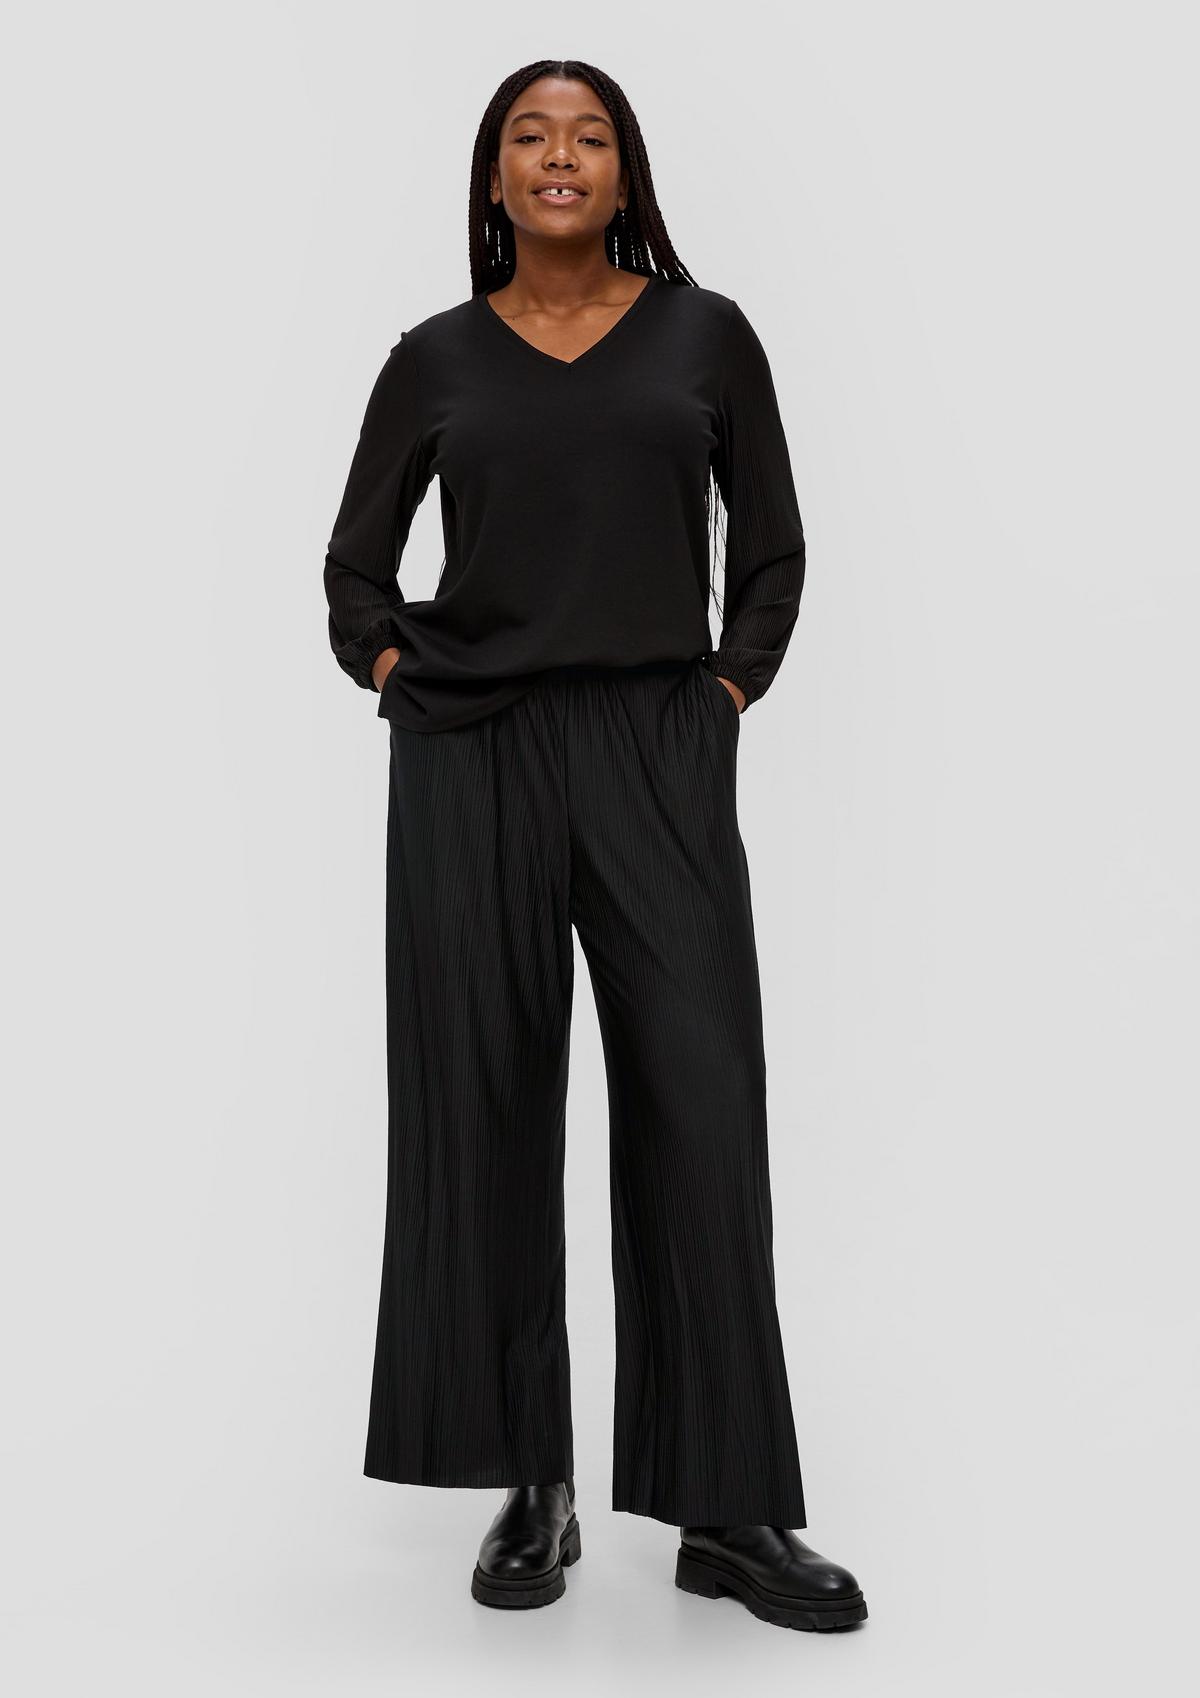 Cloth Trousers for Women